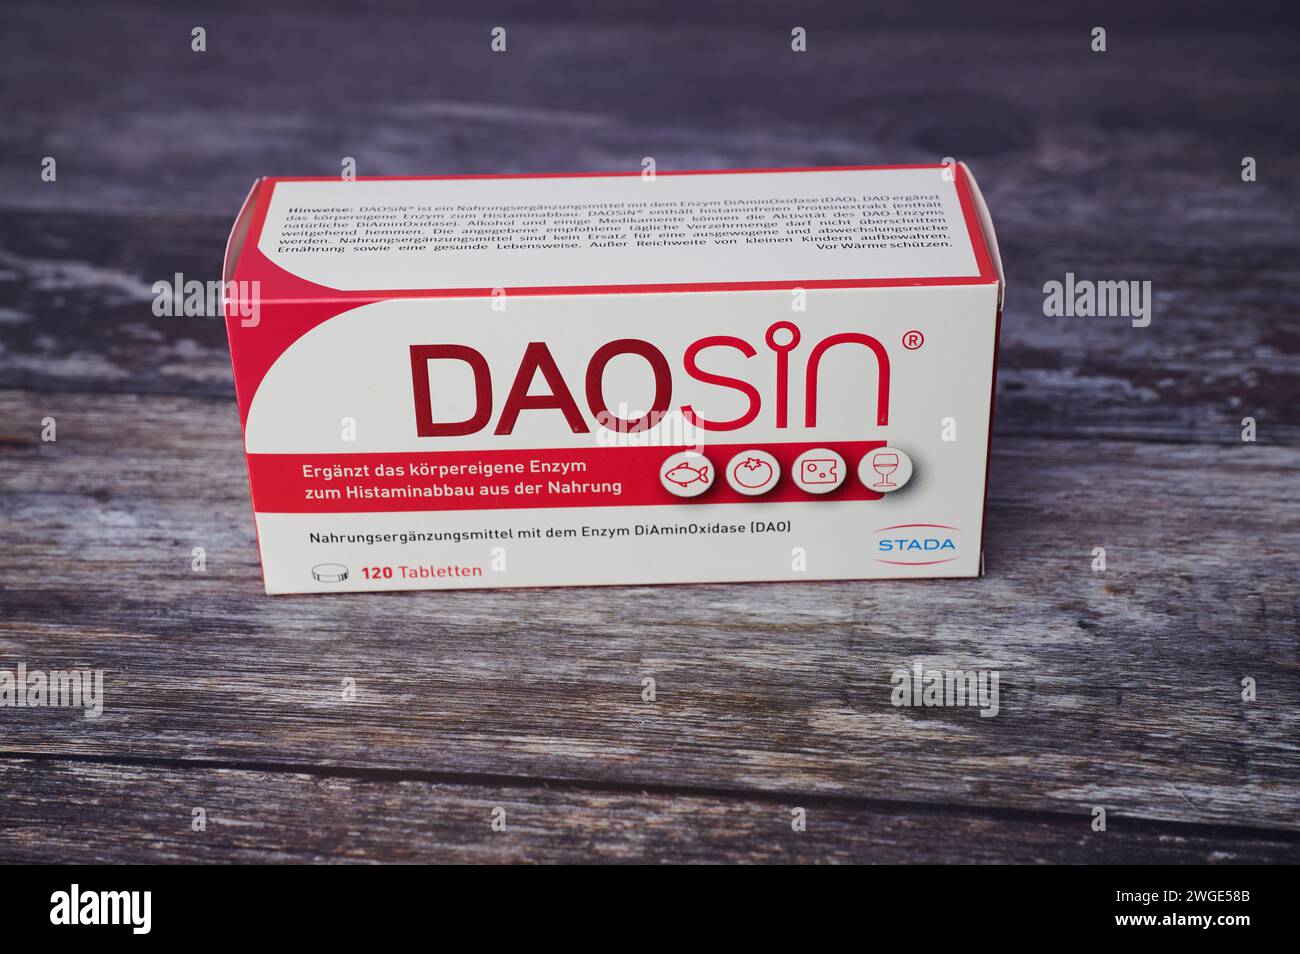 Medicine box with the active ingredient daosin from the pharmaceutical company stada Stock Photo